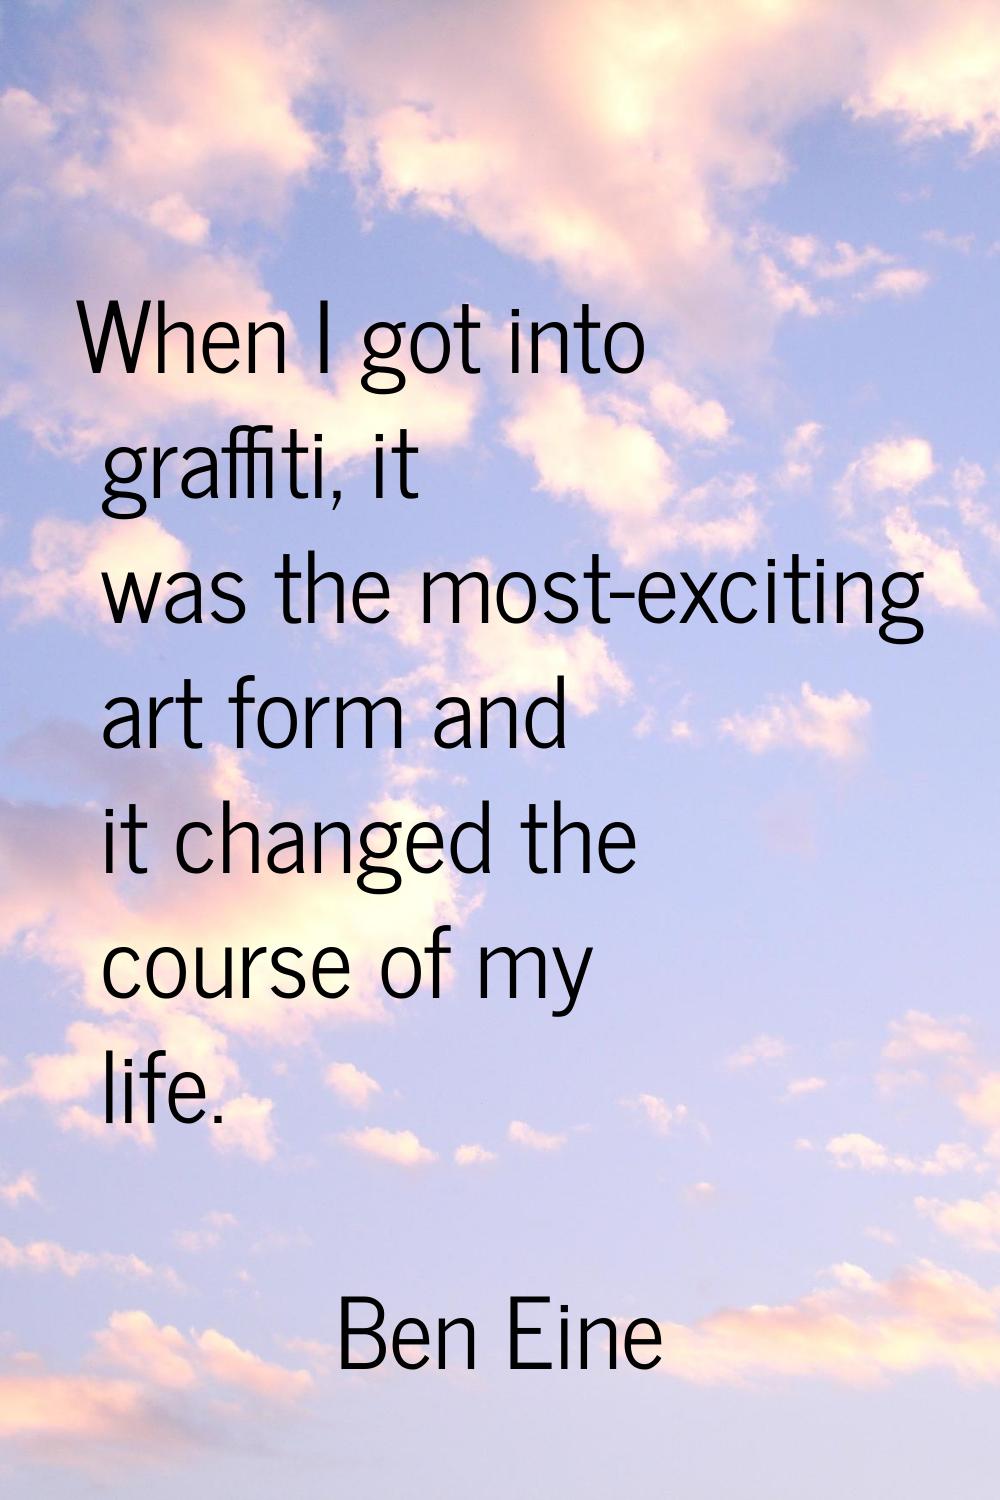 When I got into graffiti, it was the most-exciting art form and it changed the course of my life.